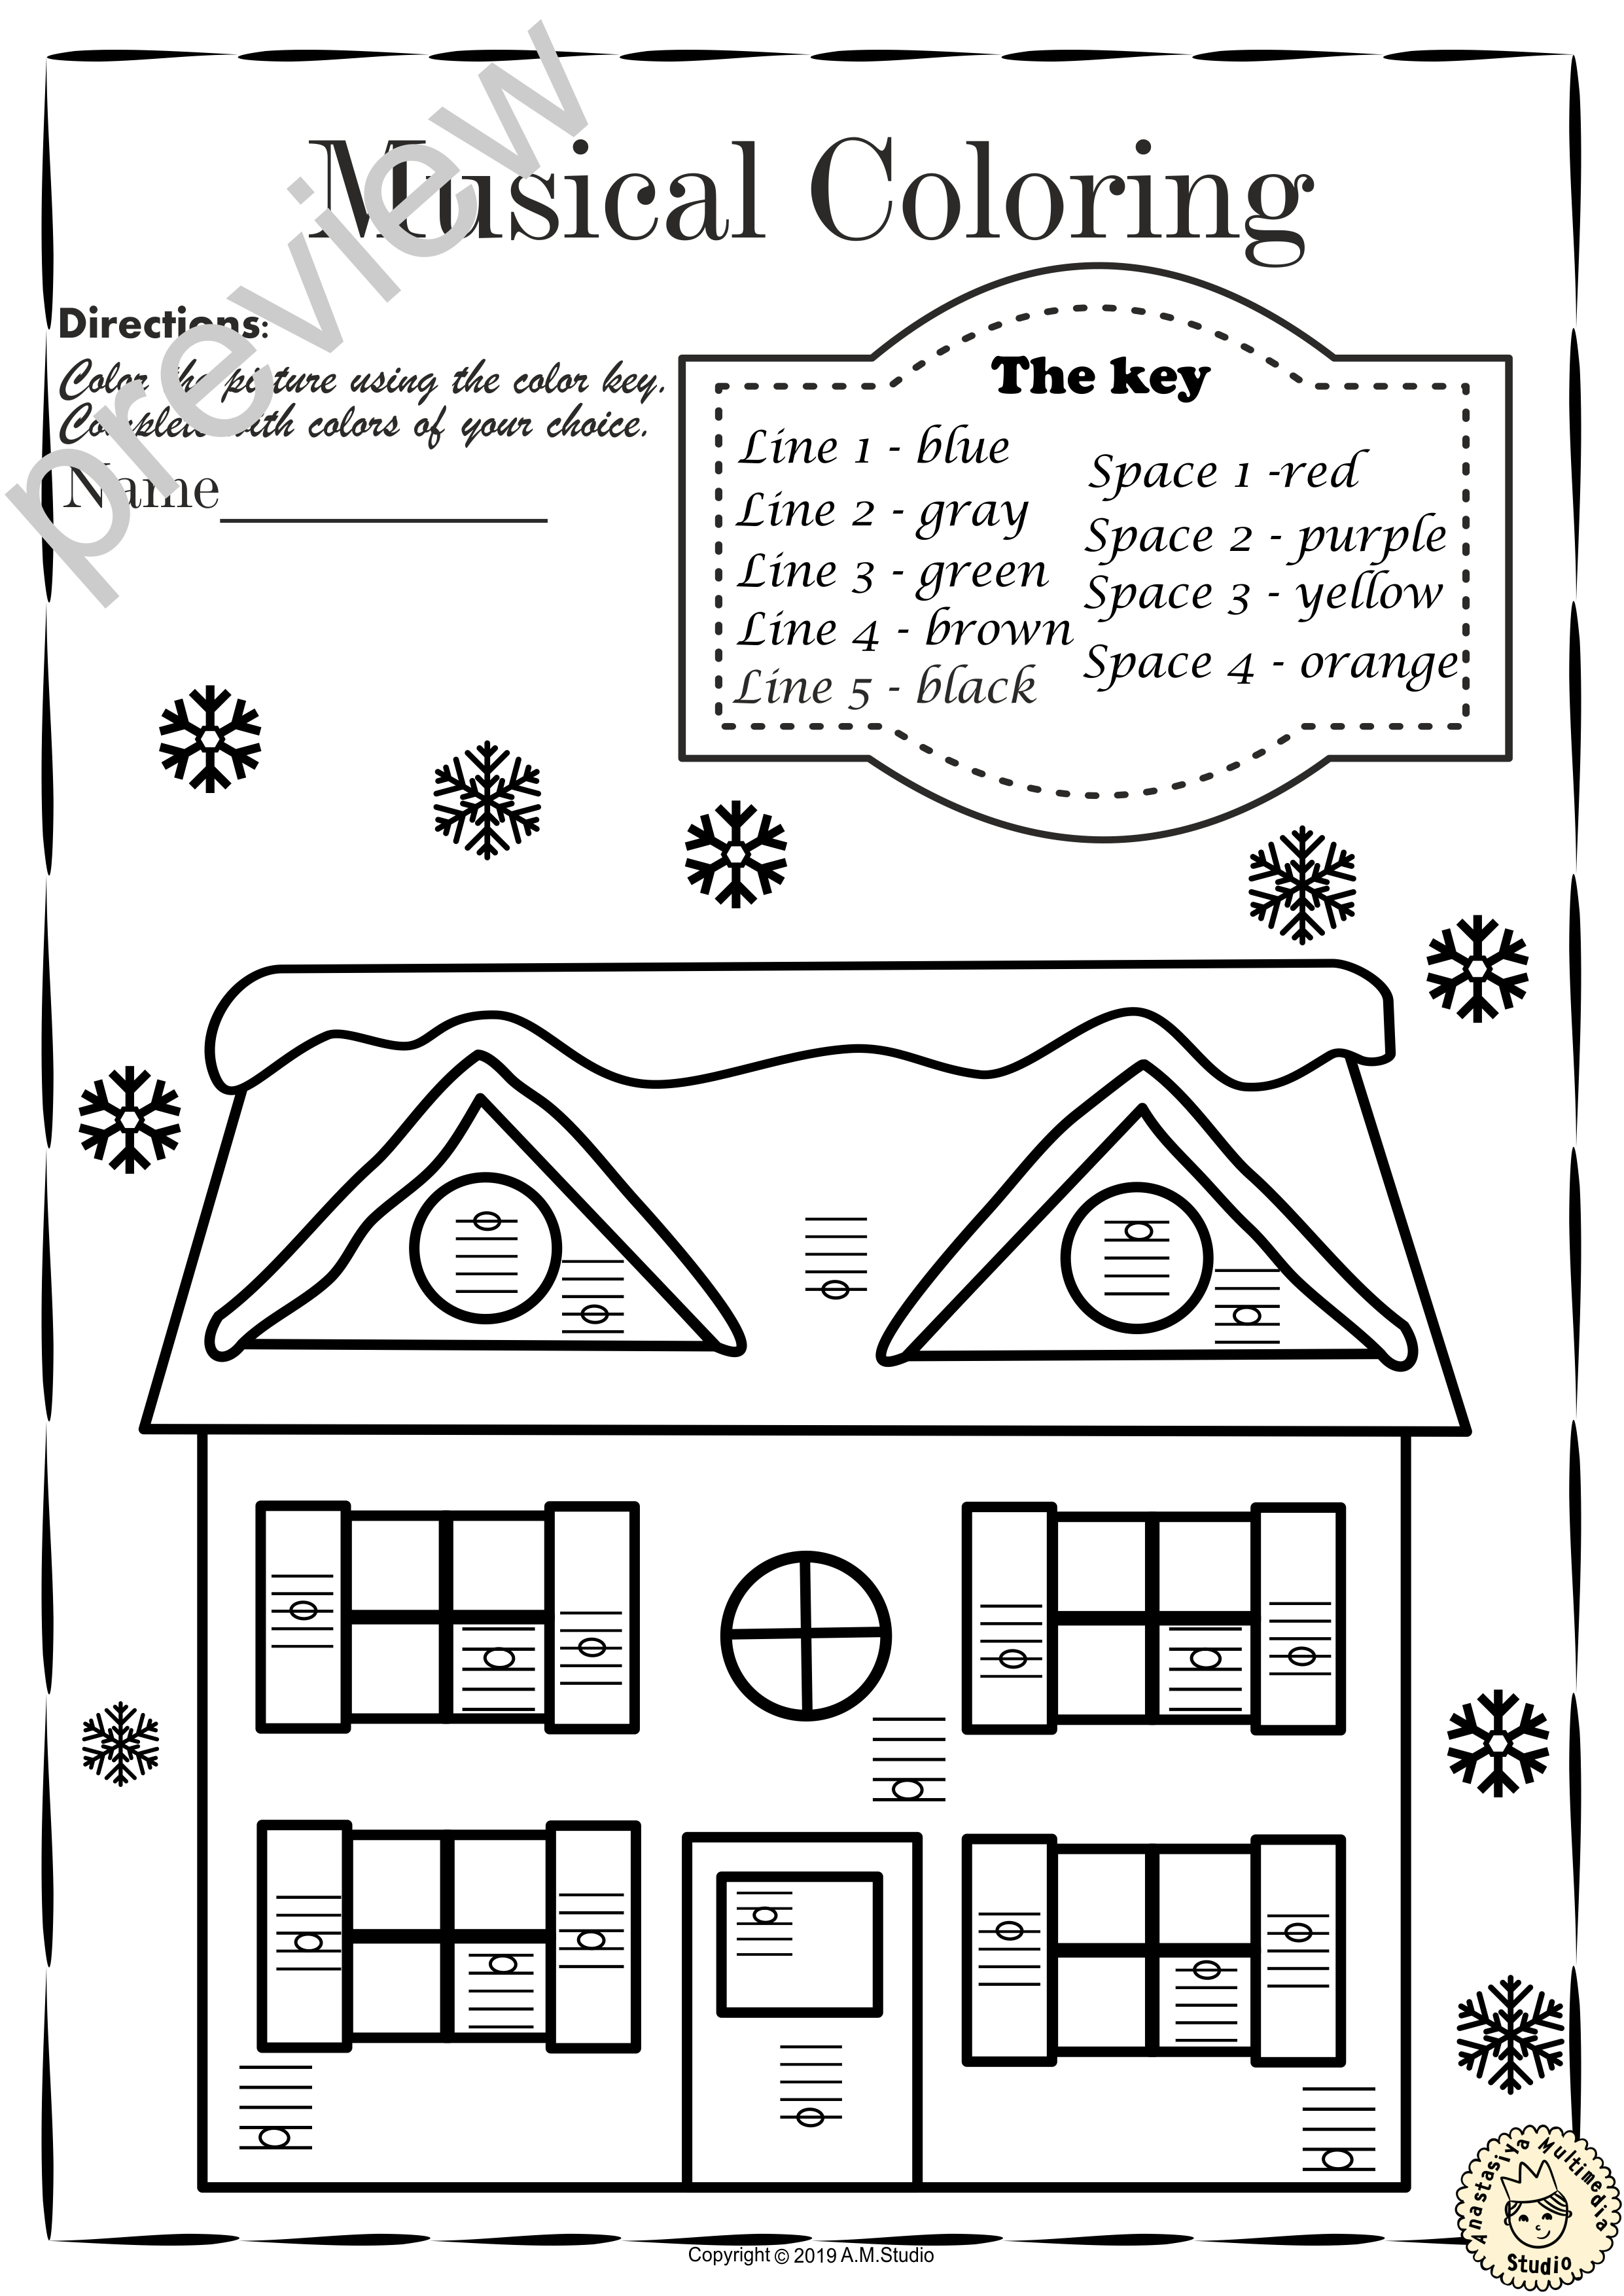 Musical Coloring Pages for Winter {Lines and Spaces} with answers (img # 4)